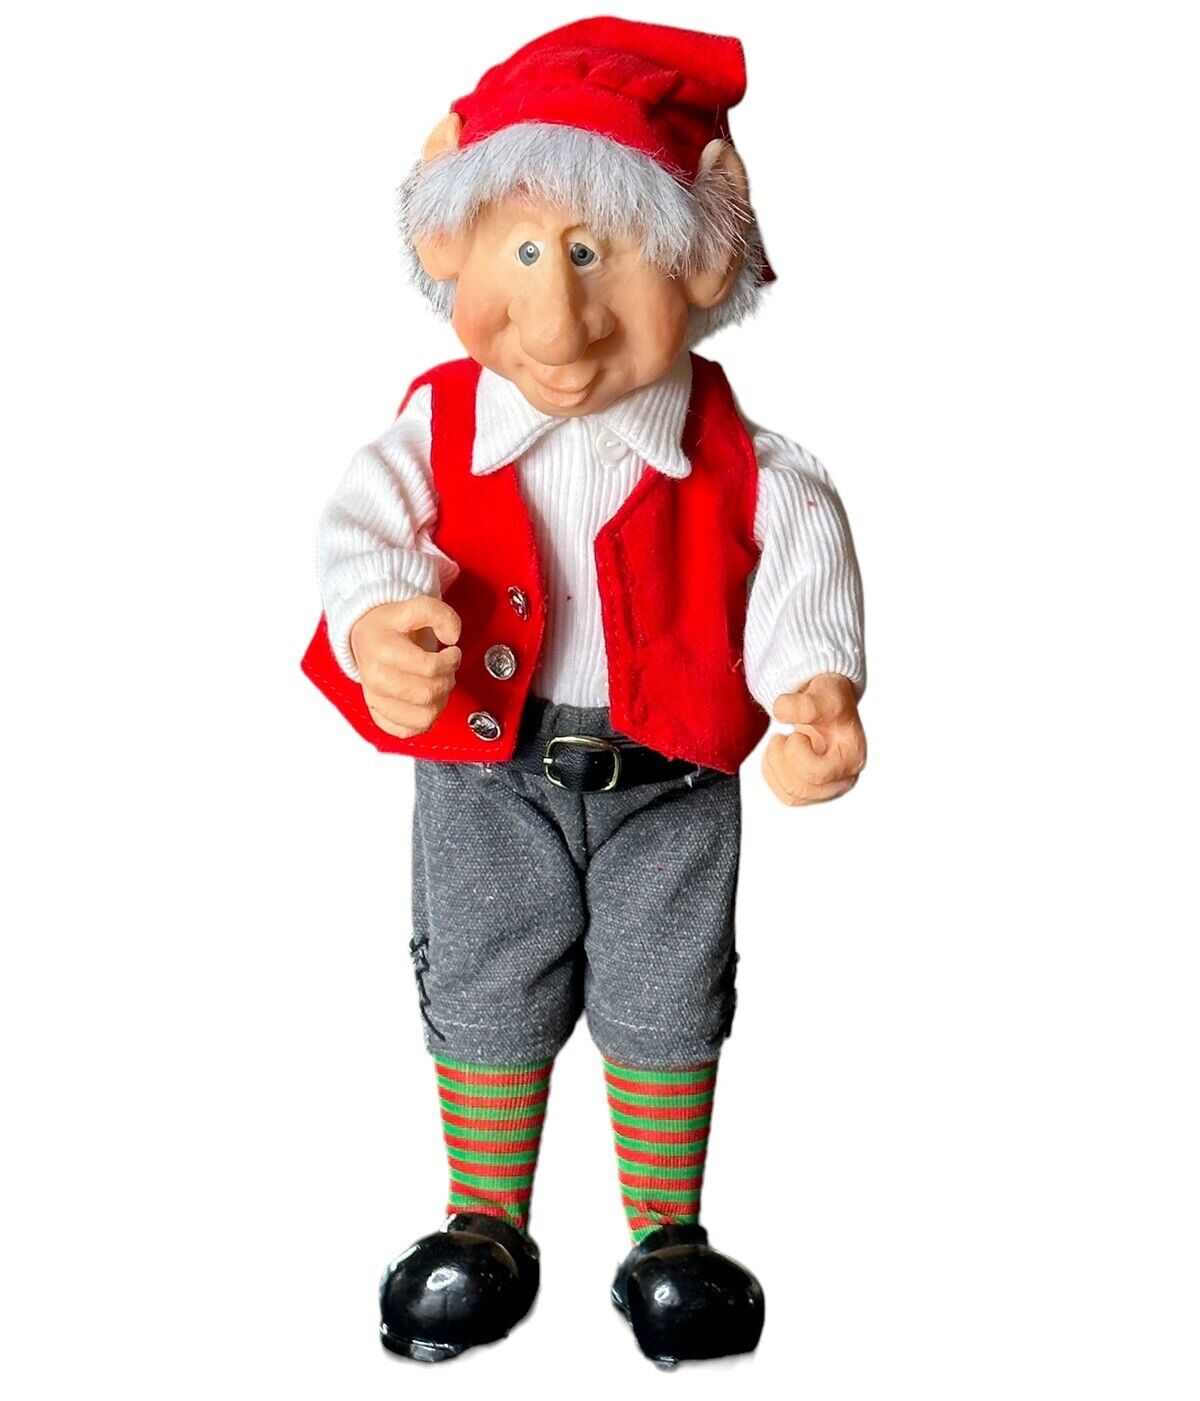 The Whitehurst Company Zim's The Elves Themselves Figurine, Theo 12 Inches